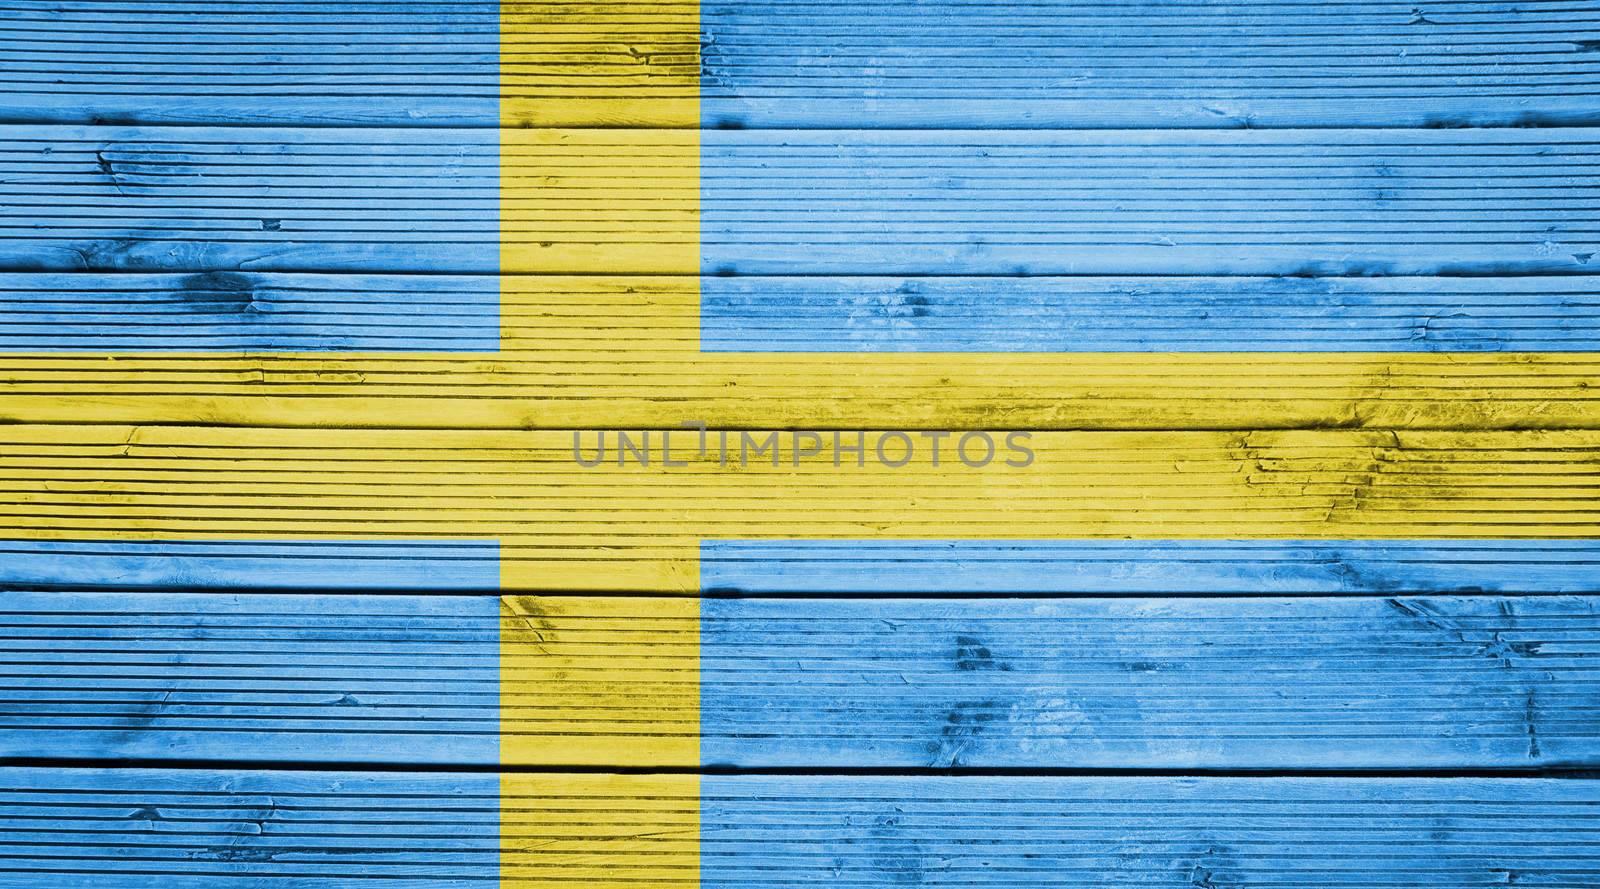 Wood texture background with colors of the flag of Sweden by doble.d